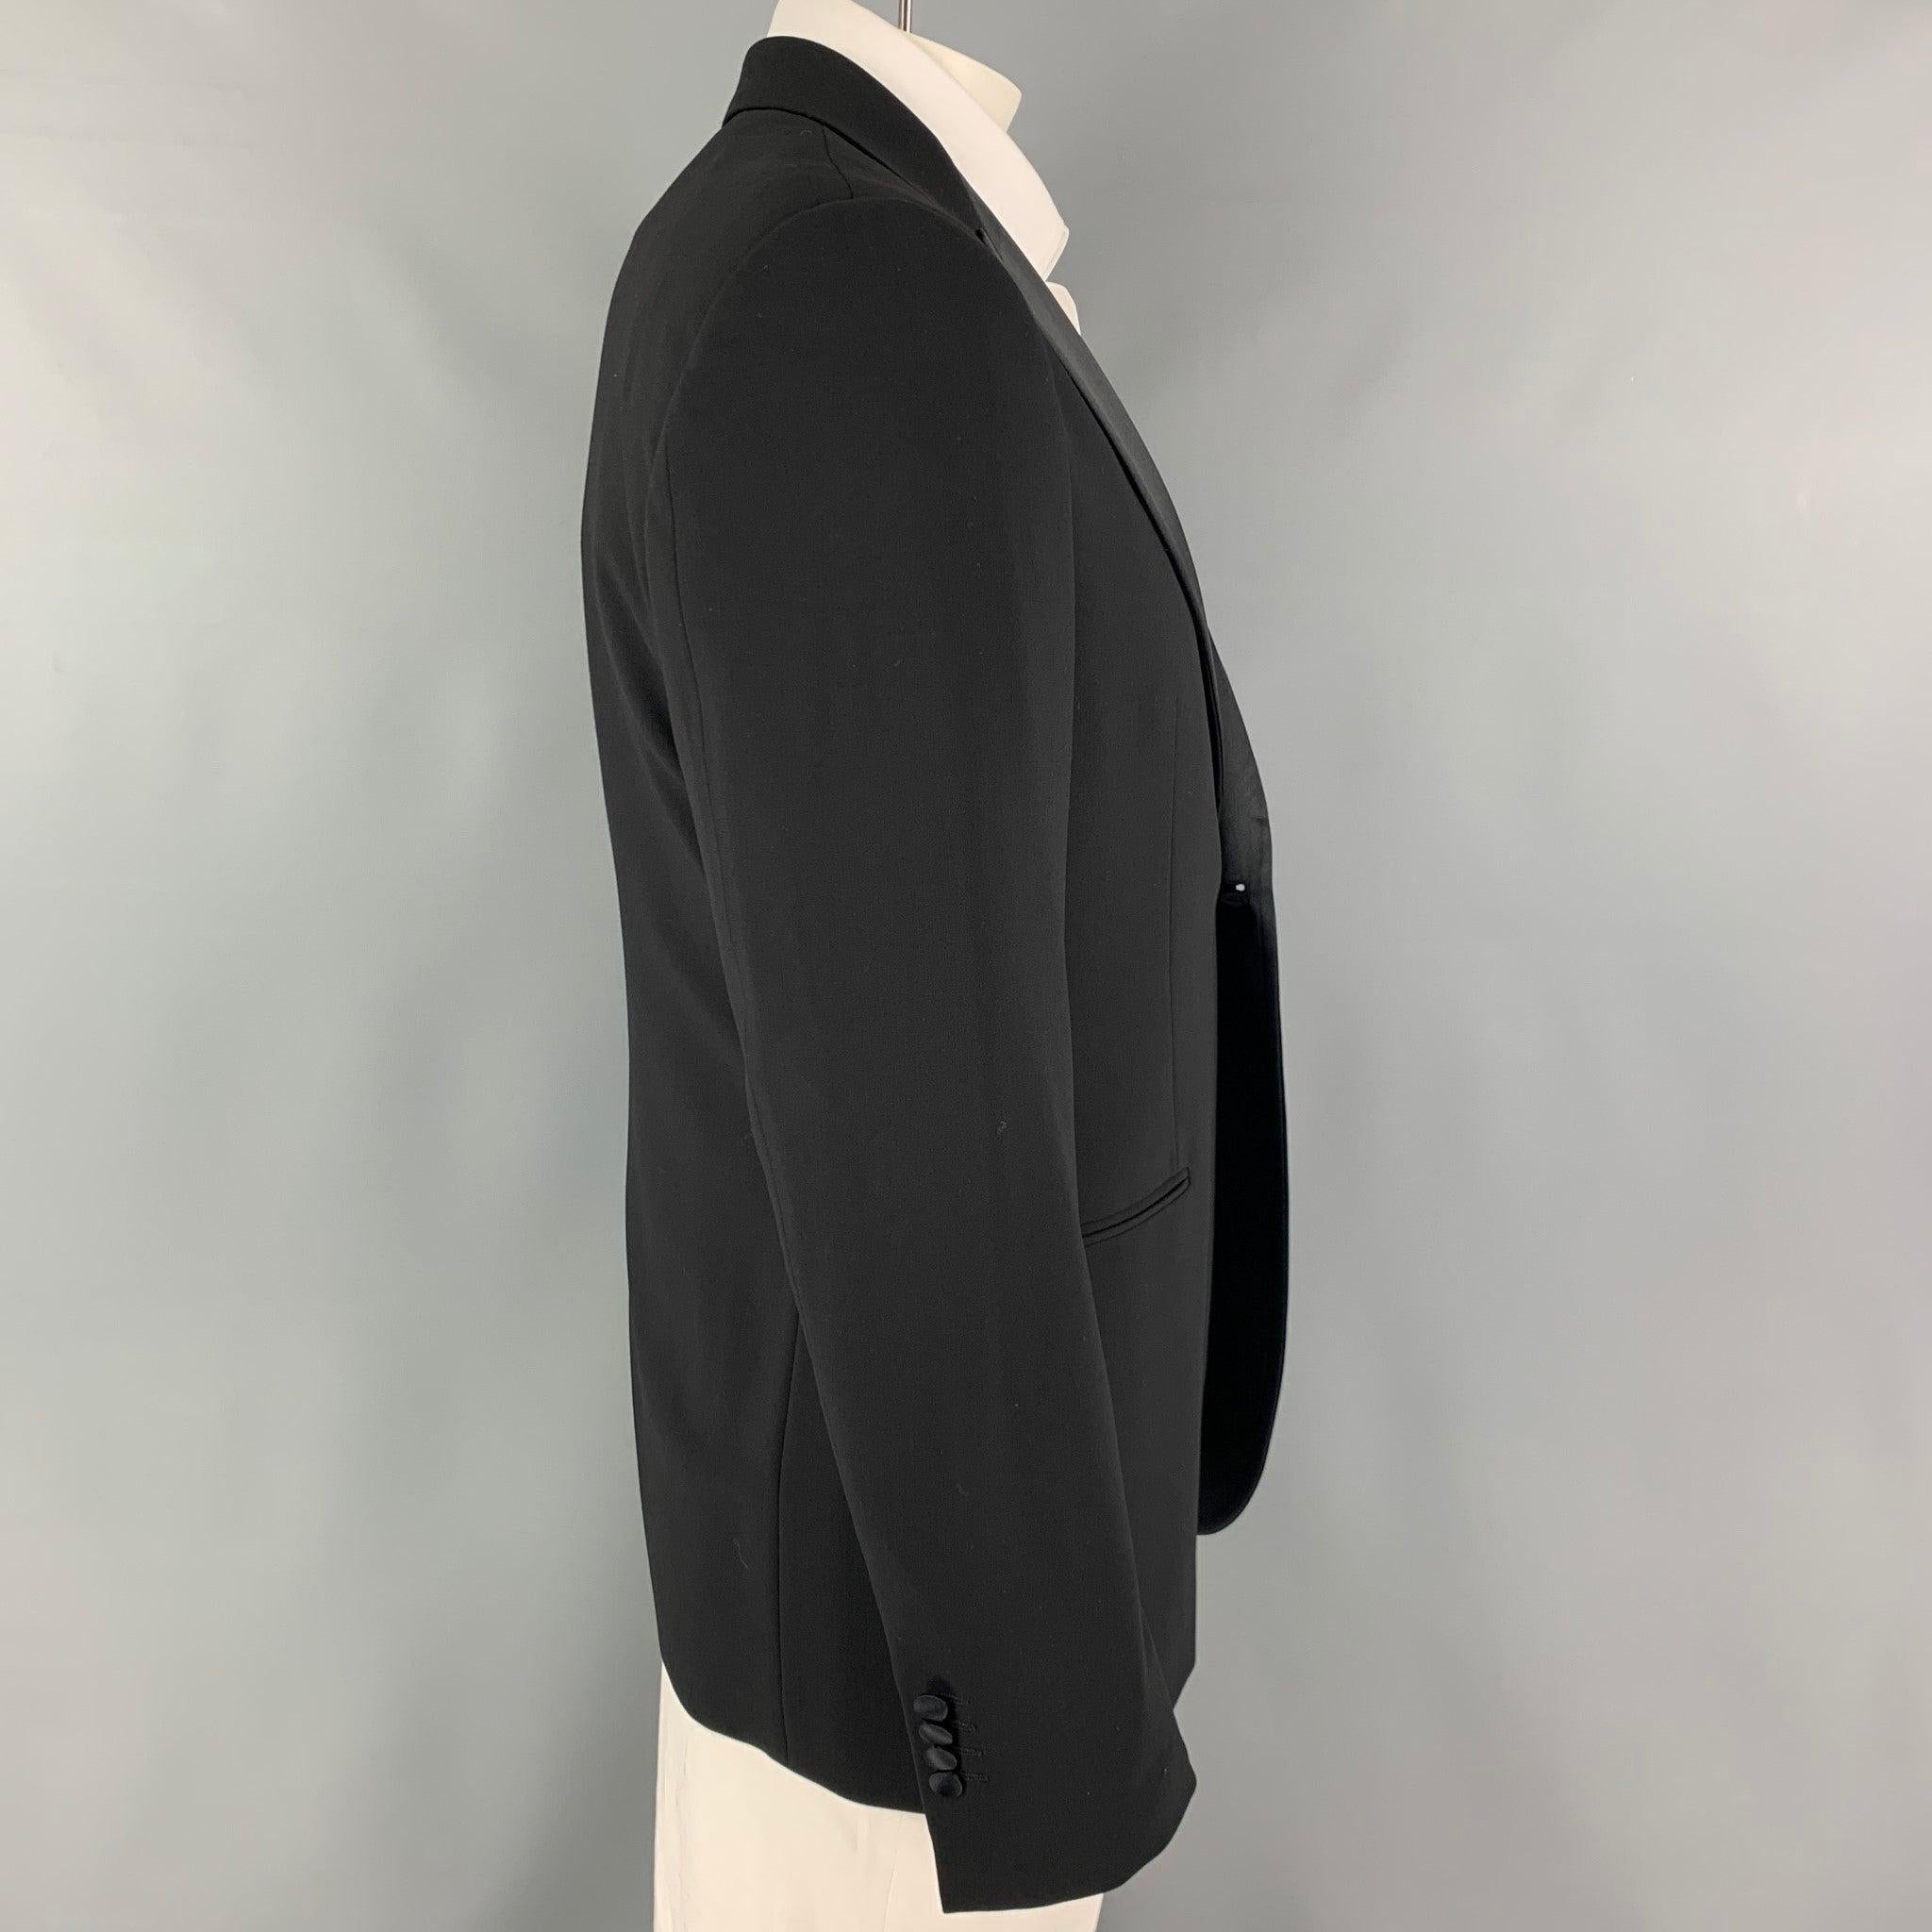 GIORGIO ARMANI sport coat comes in a black lana wool with a full liner featuring a peak lapel, slit pockets, and a single button closure. Made in Italy.
Very Good
Pre-Owned Condition. 

Marked:   52 

Measurements: 
 
Shoulder: 18 inches Chest:
42